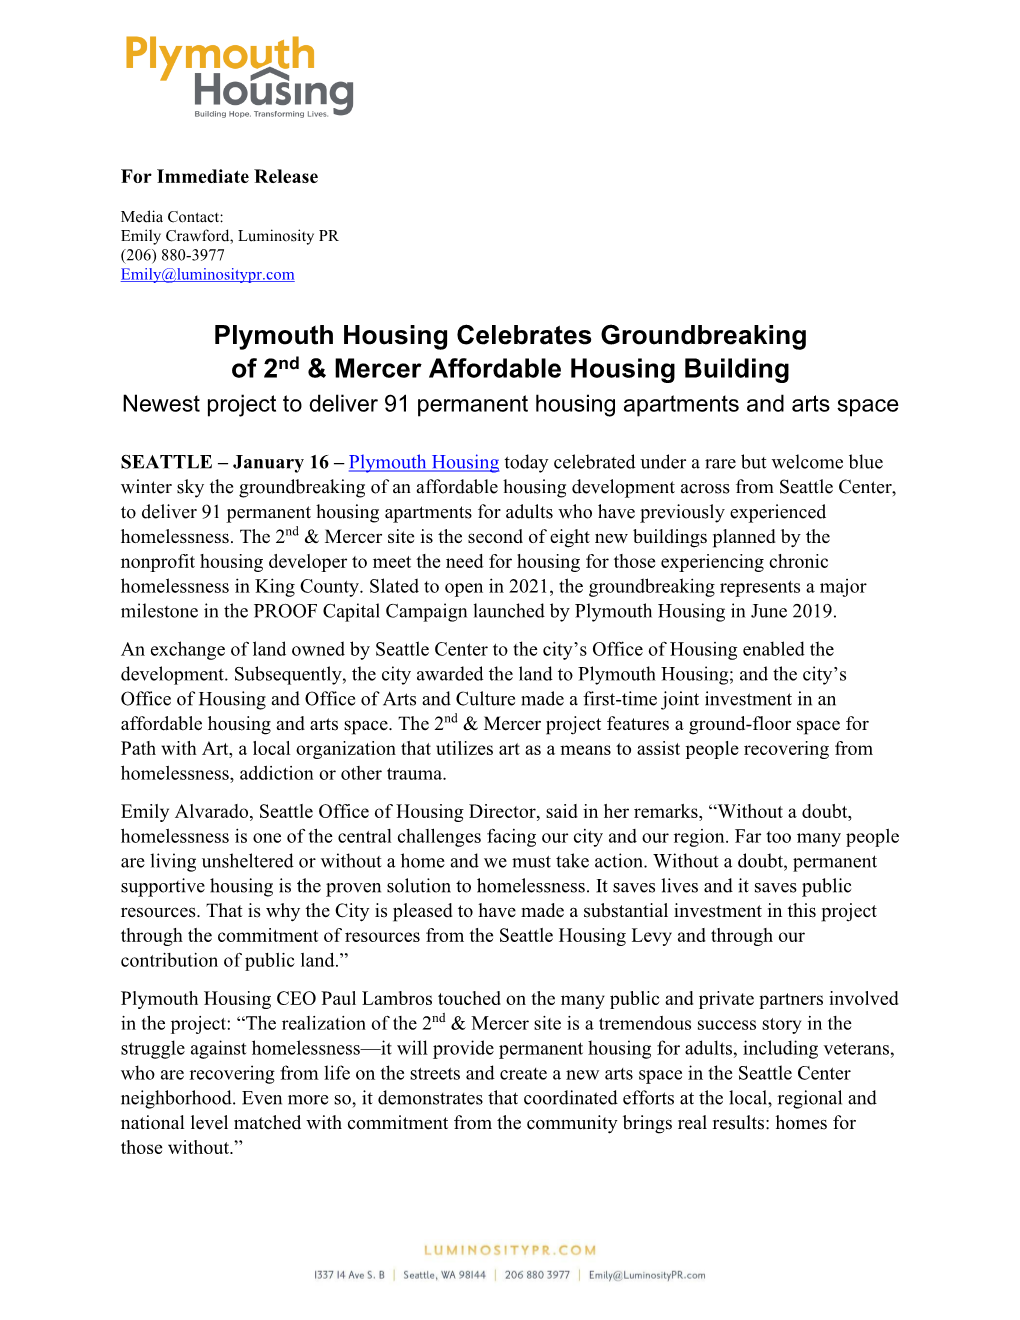 Plymouth Housing Celebrates Groundbreaking of 2Nd & Mercer Affordable Housing Building